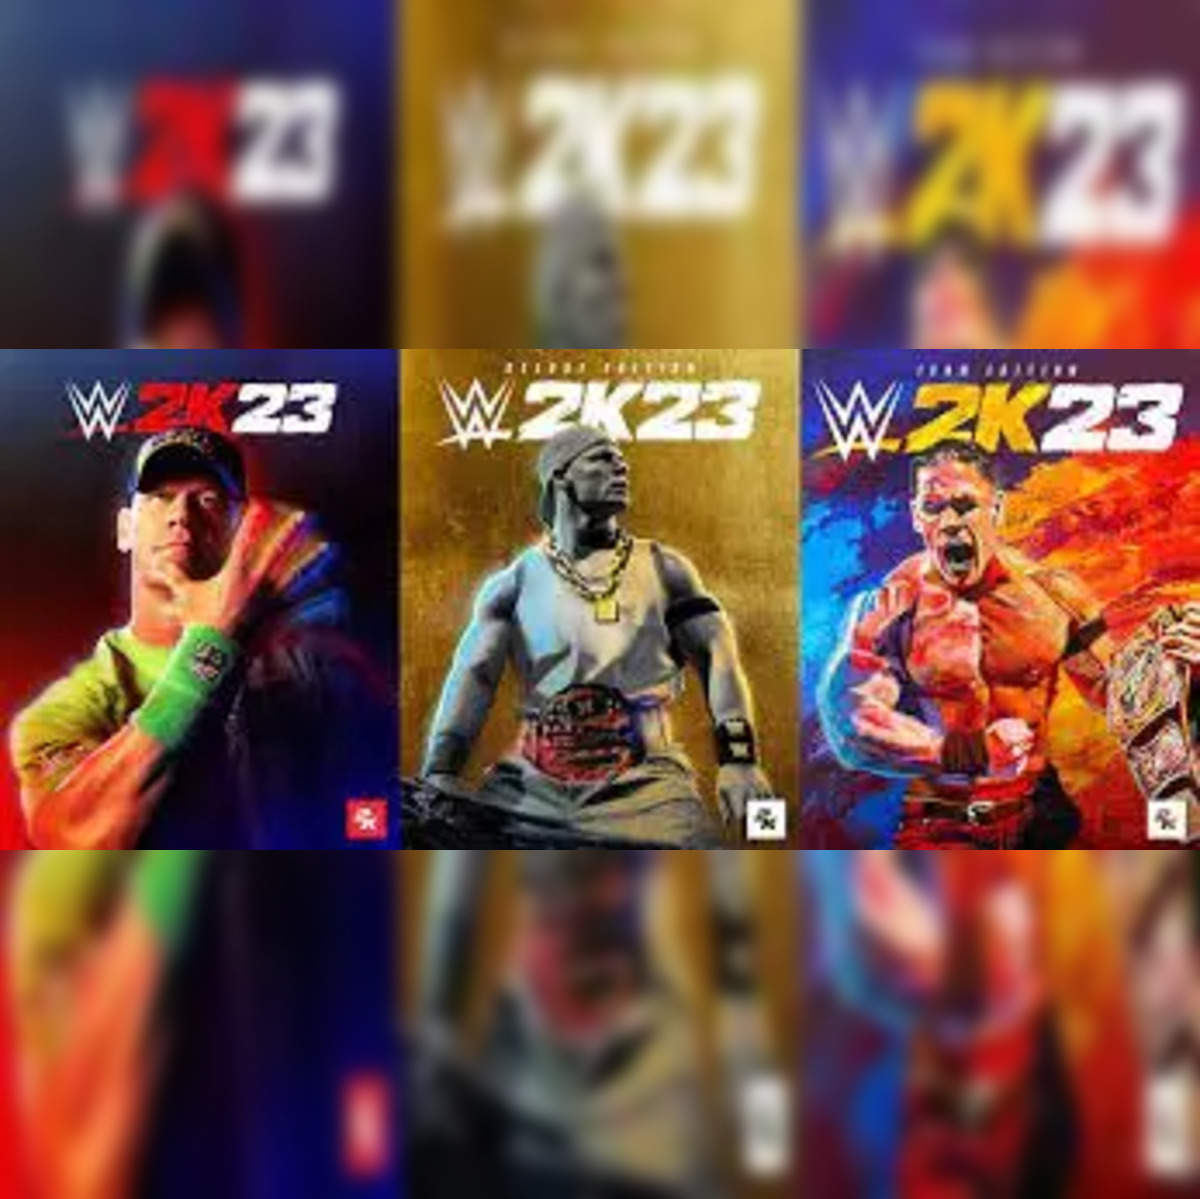 Pro Wrestling Network - The full roster for WWE 2K22 is out. There